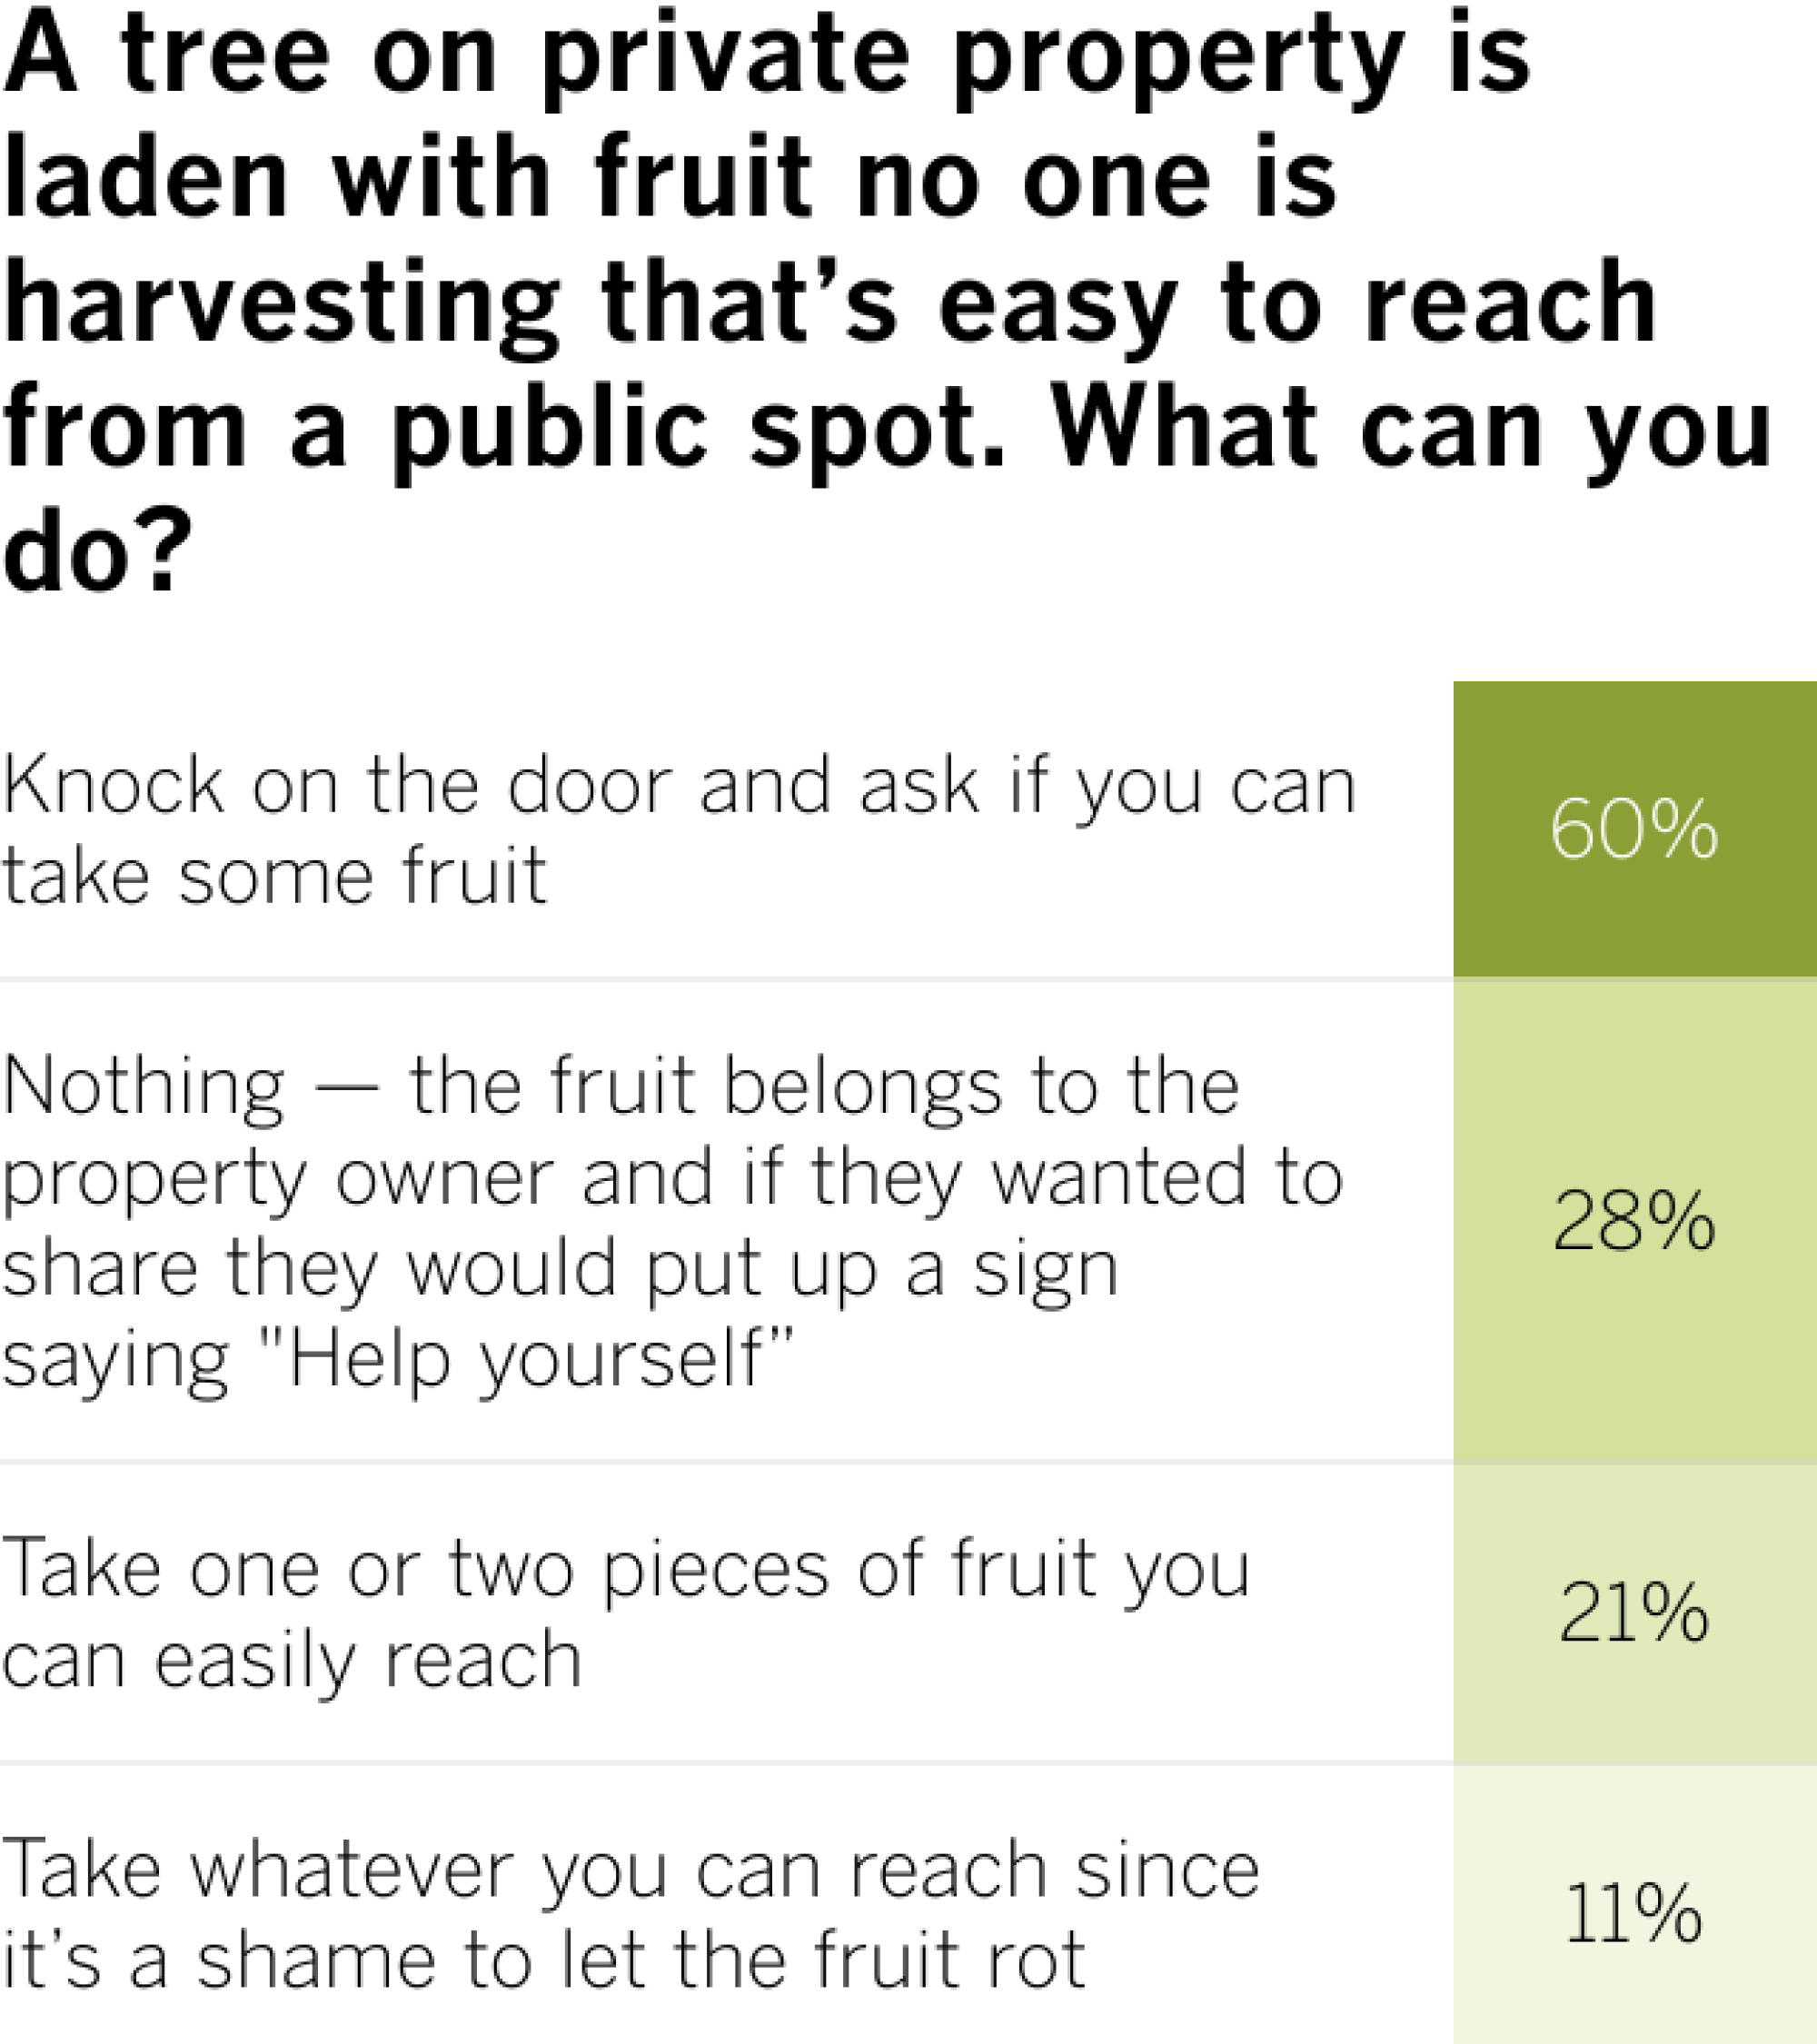 A tree on private property is laden with fruit no one is harvesting that’s easy to reach from a public spot. What can you do?